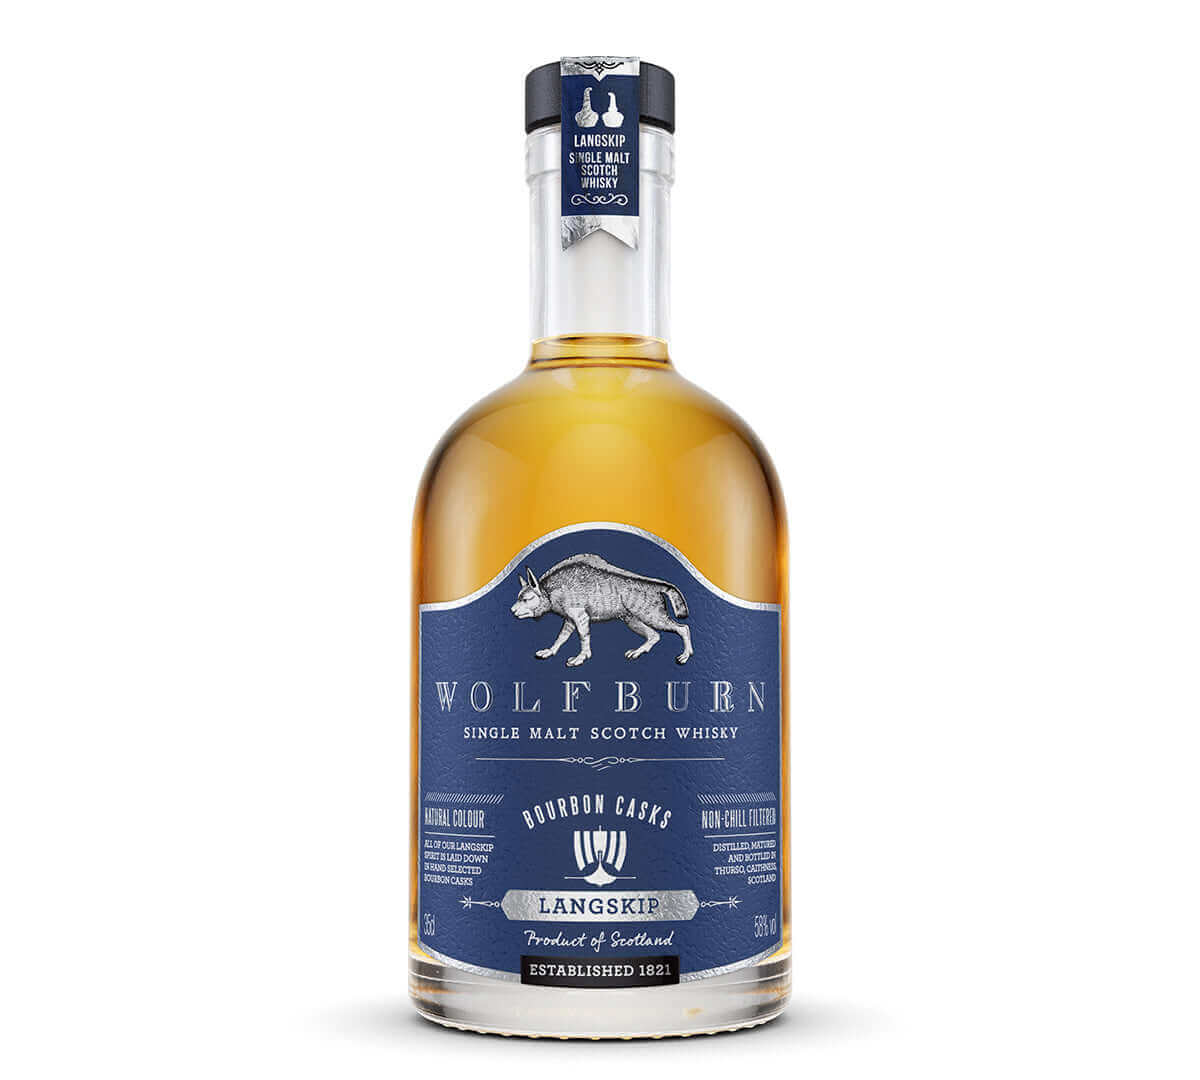 Wolfburn Distillery Wolfburn Morven – 46% vol. 70cl This lightly peated whisky is made from malted barley infused with smoke during the drying process. It’s a reflection of history – the original 19th Century distillery was largely fired by peat. Gentle d